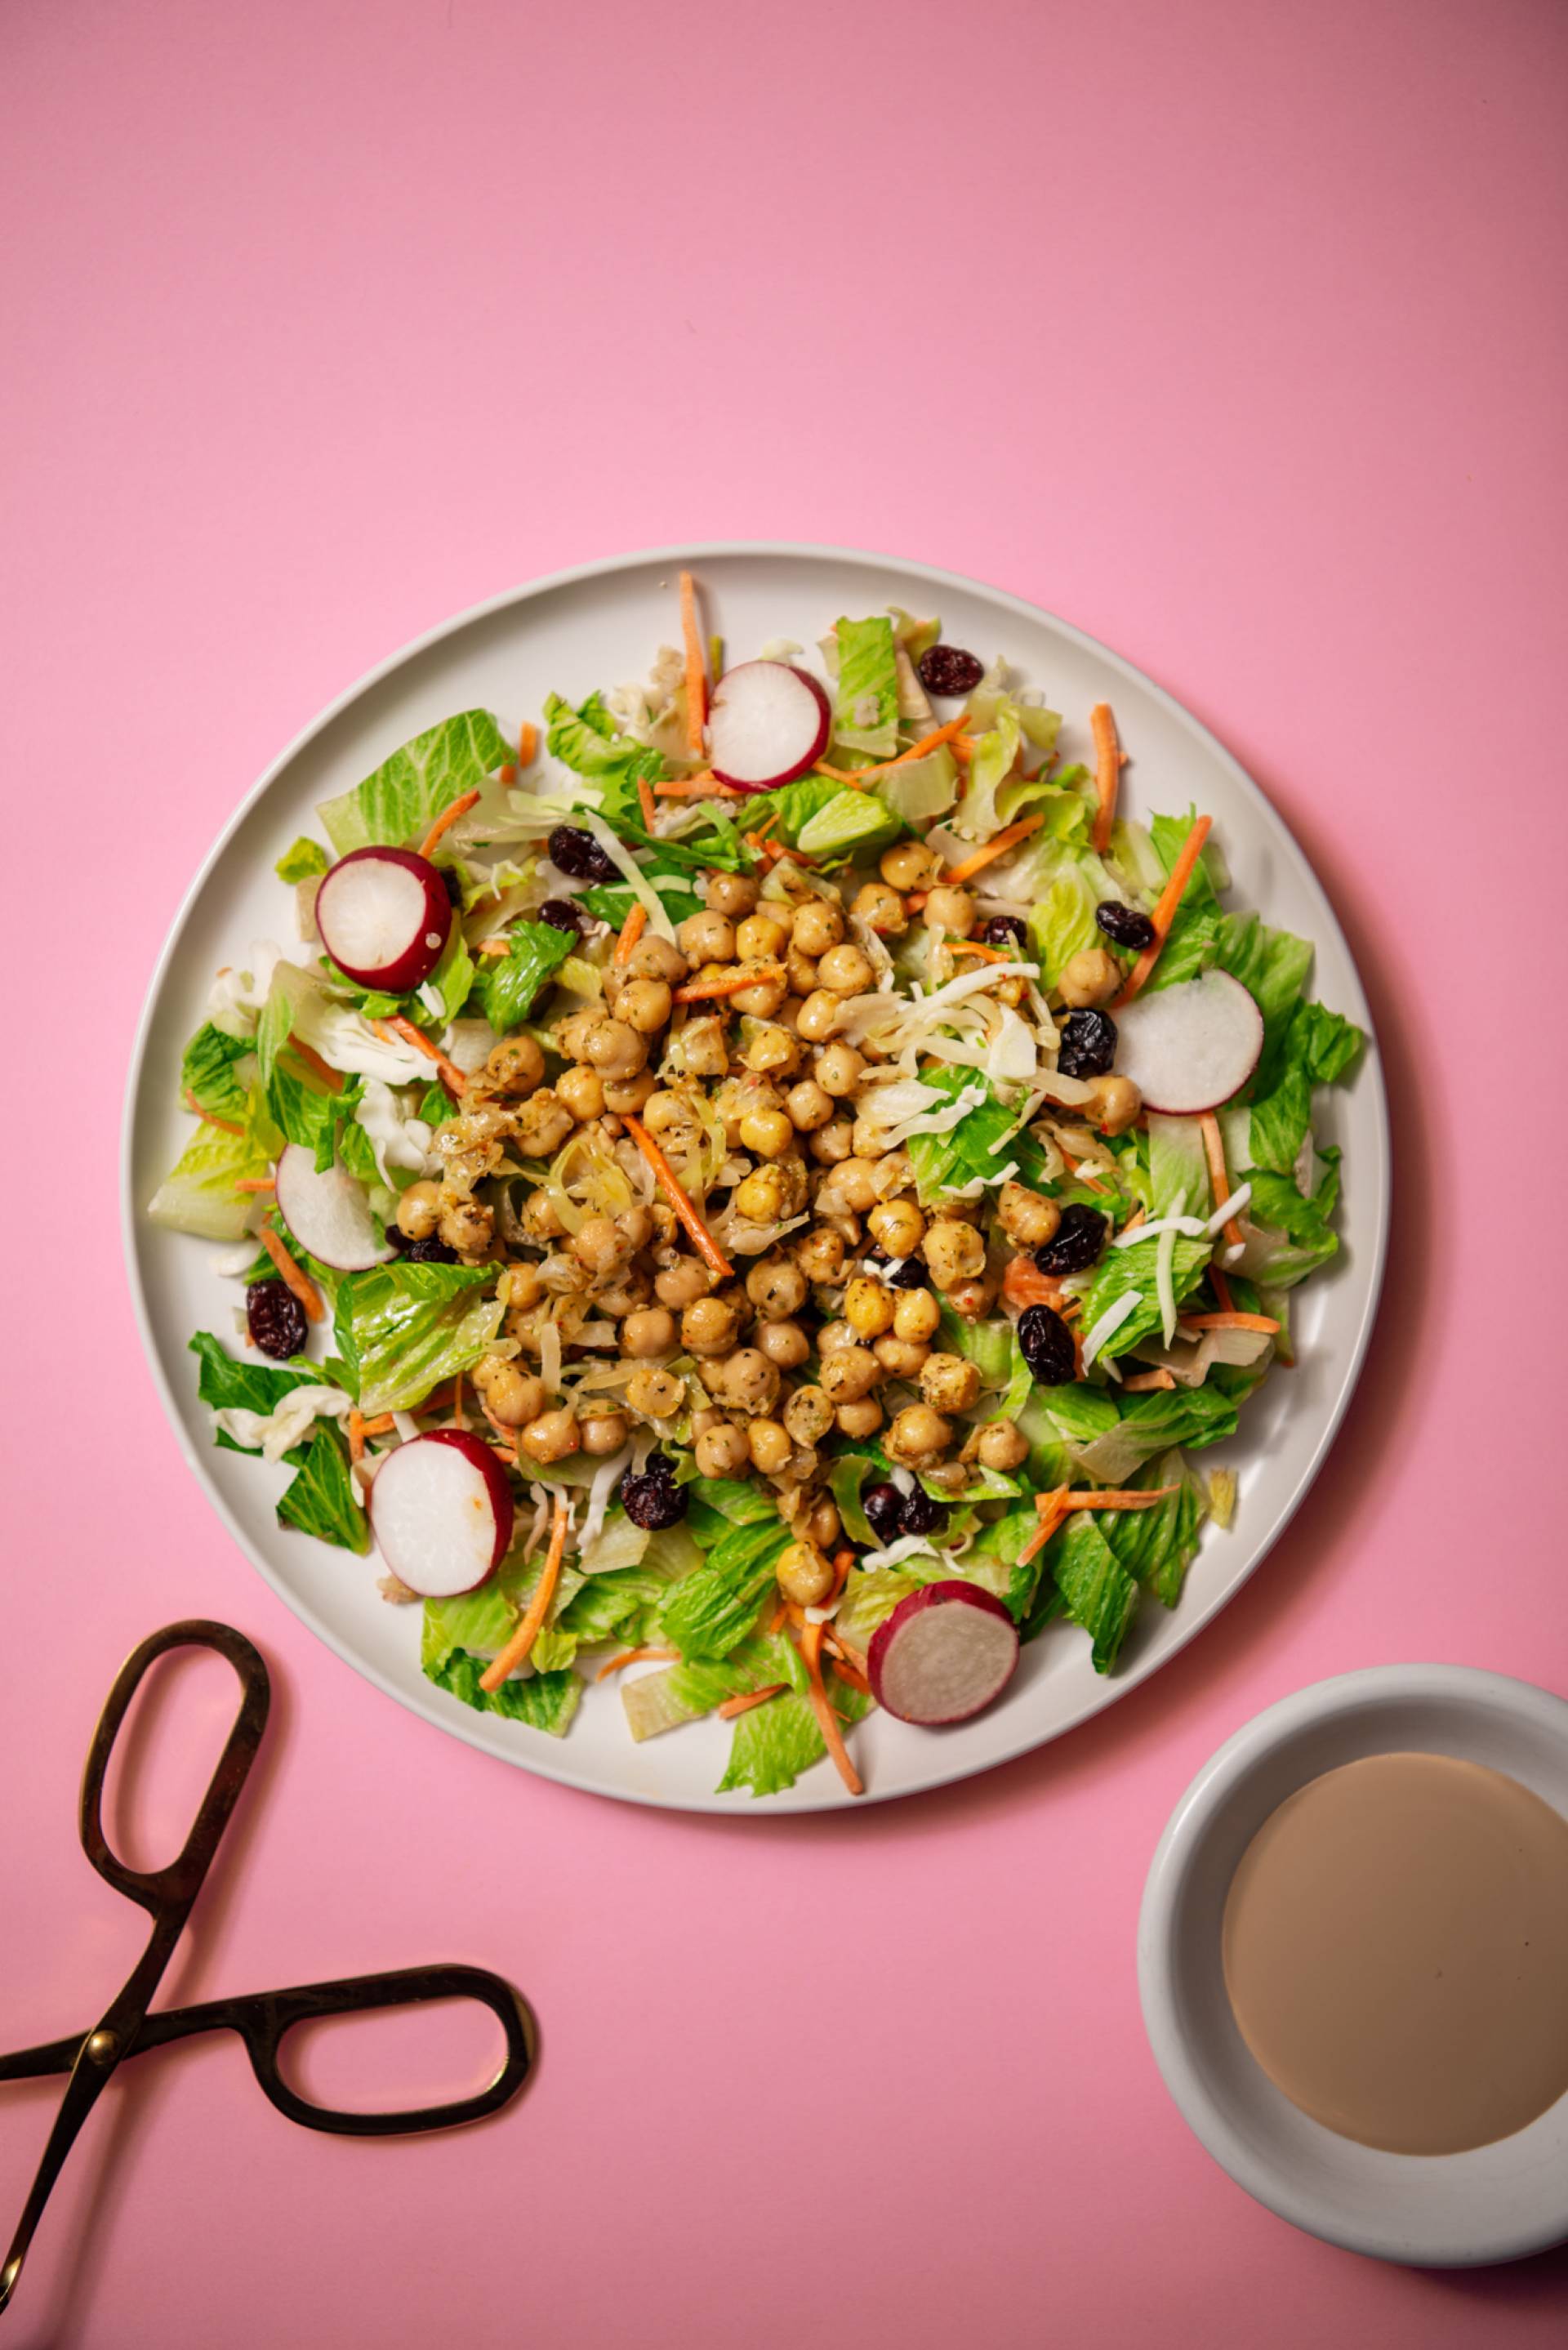 Mega Crunchy Romaine Salad with Chickpeas (MEAT FREE)